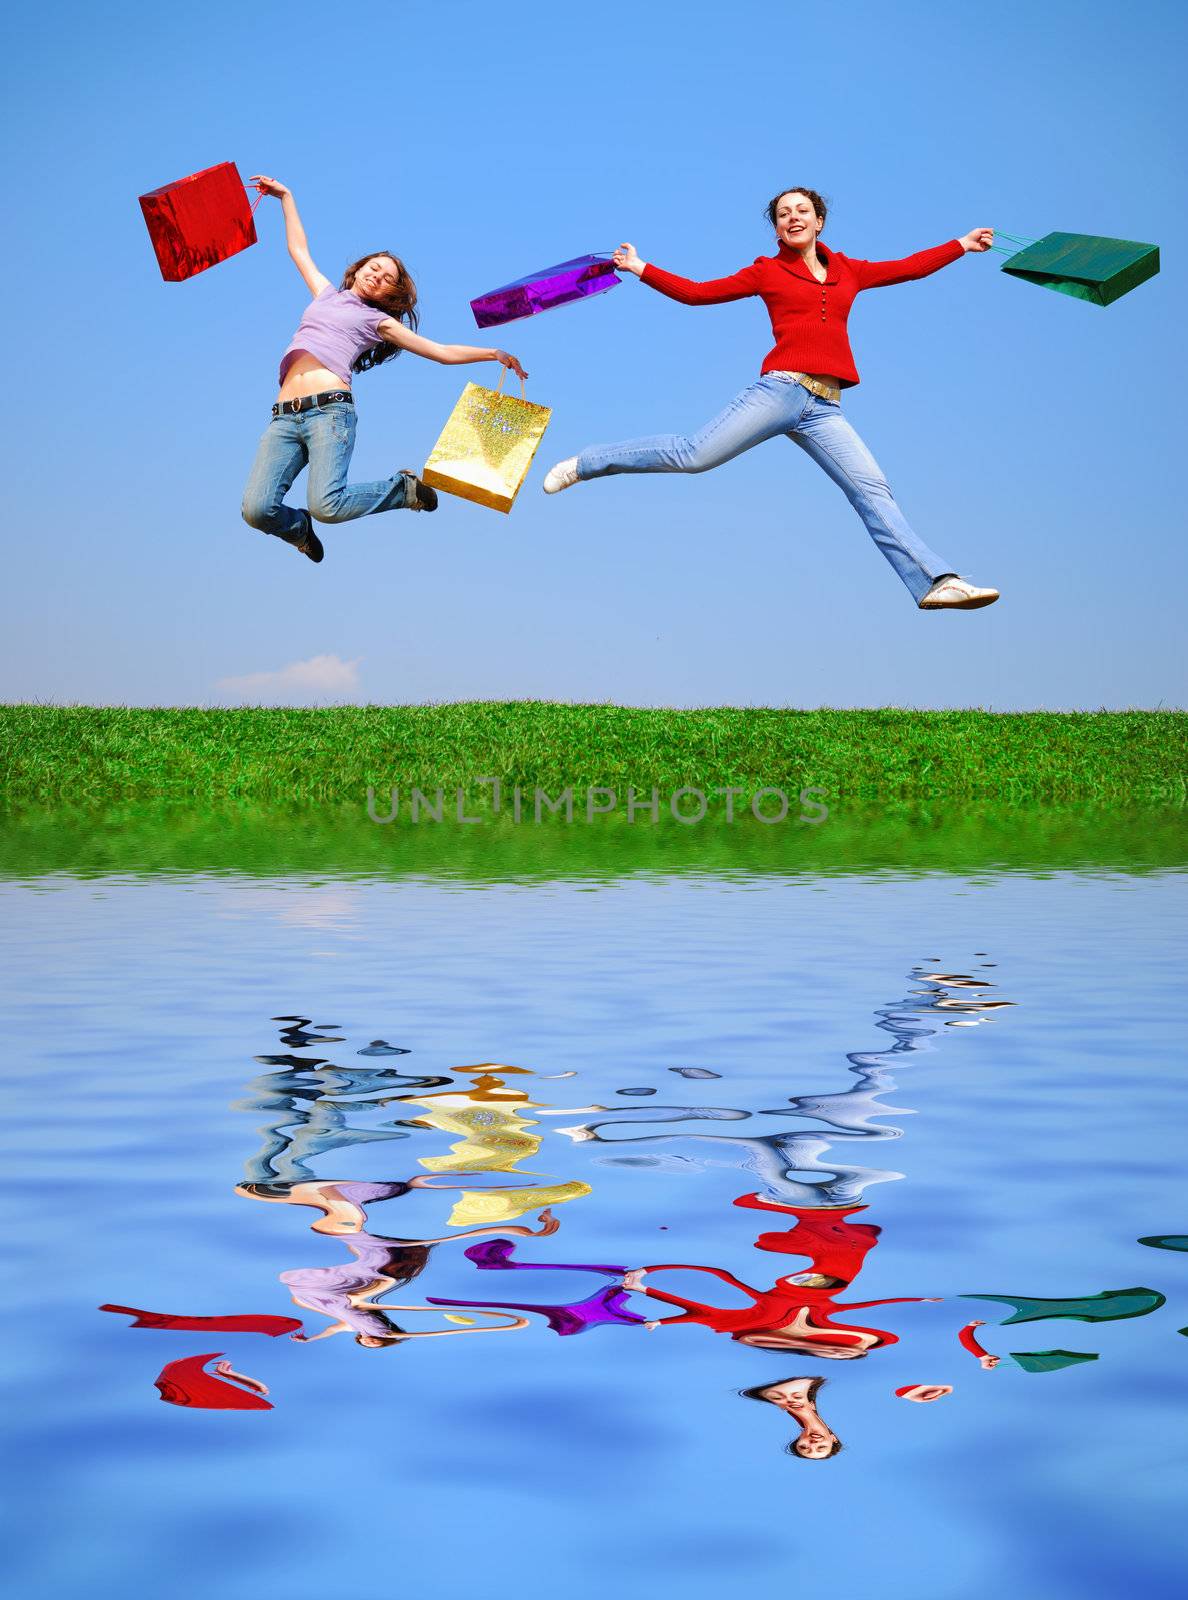 Girls jumping with bags against blue sky with reflection on water